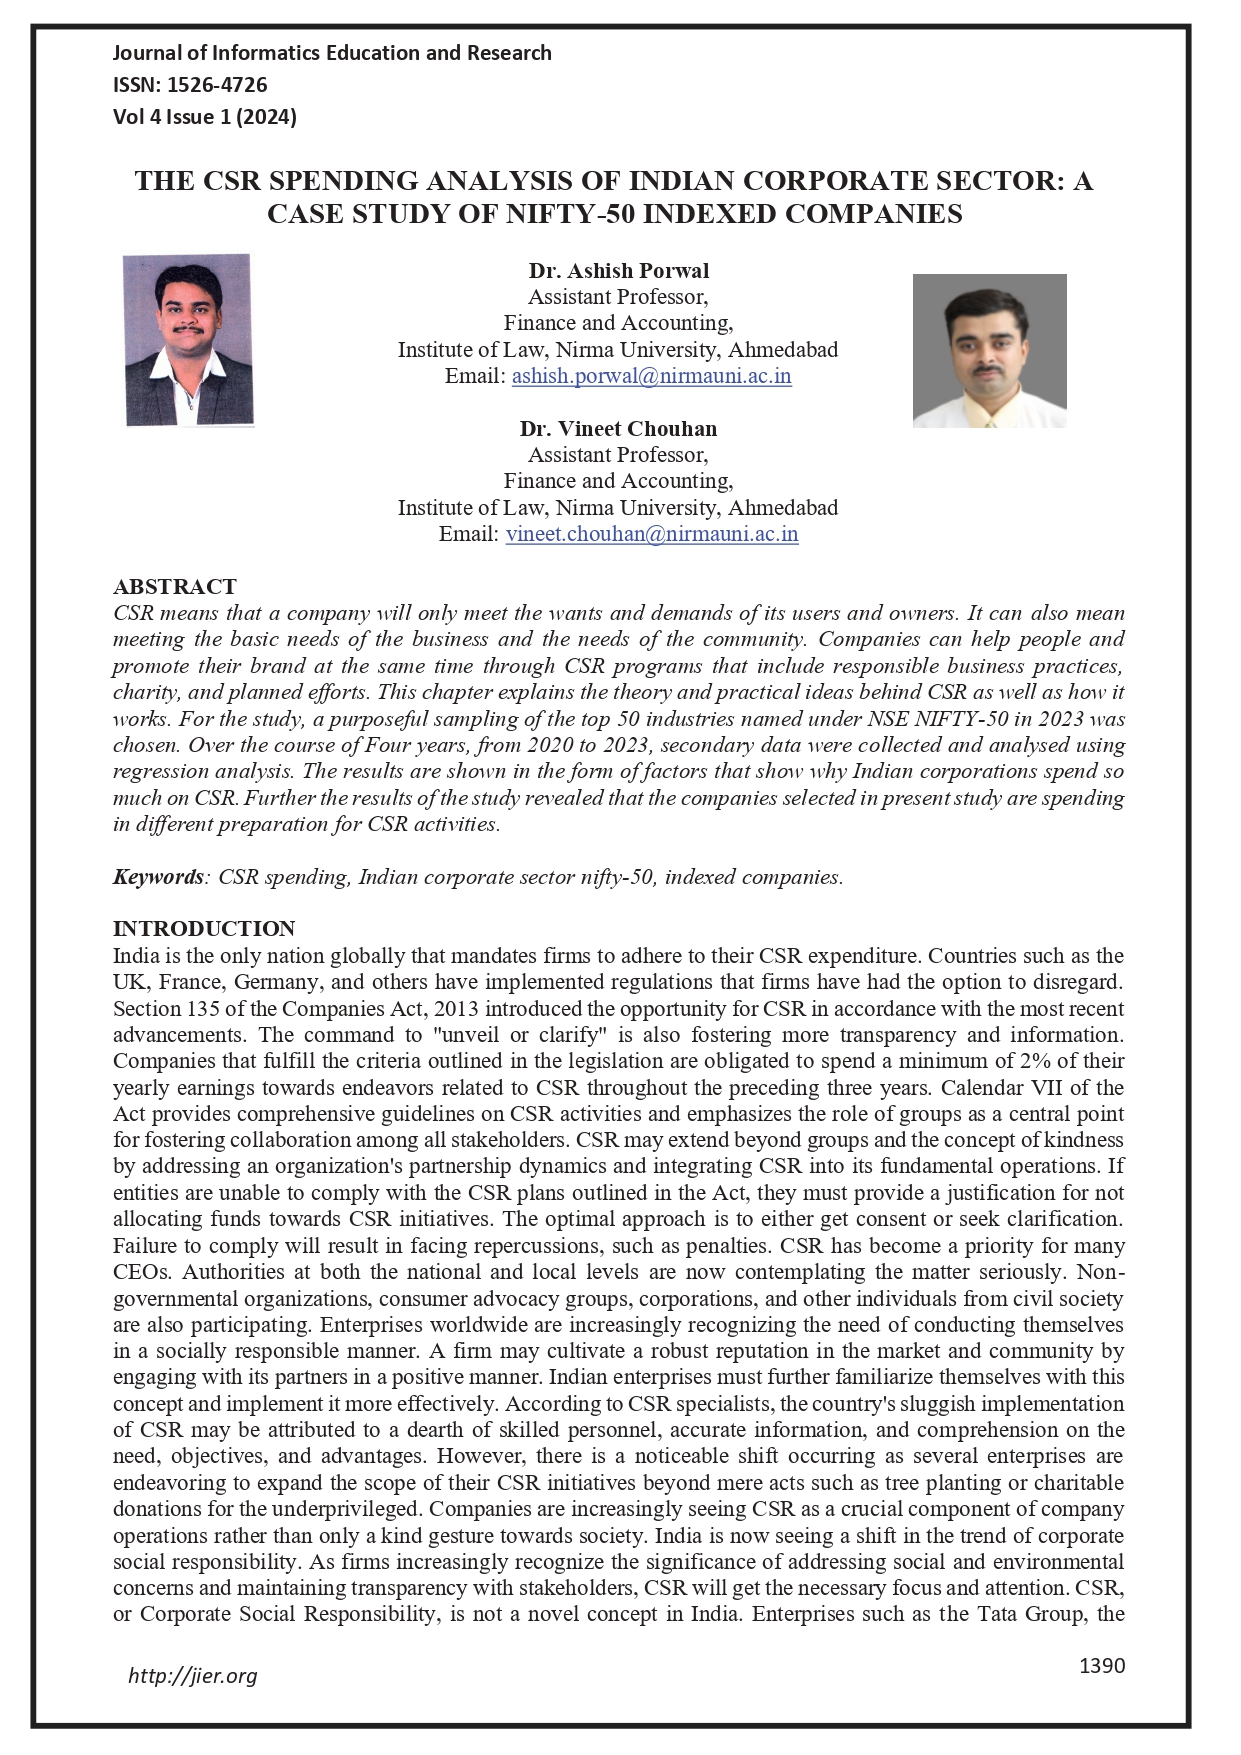 The CSR Spending Analysis of Indian Corporate Sector: A Case Study of NIFTY-50 Indexed Companies